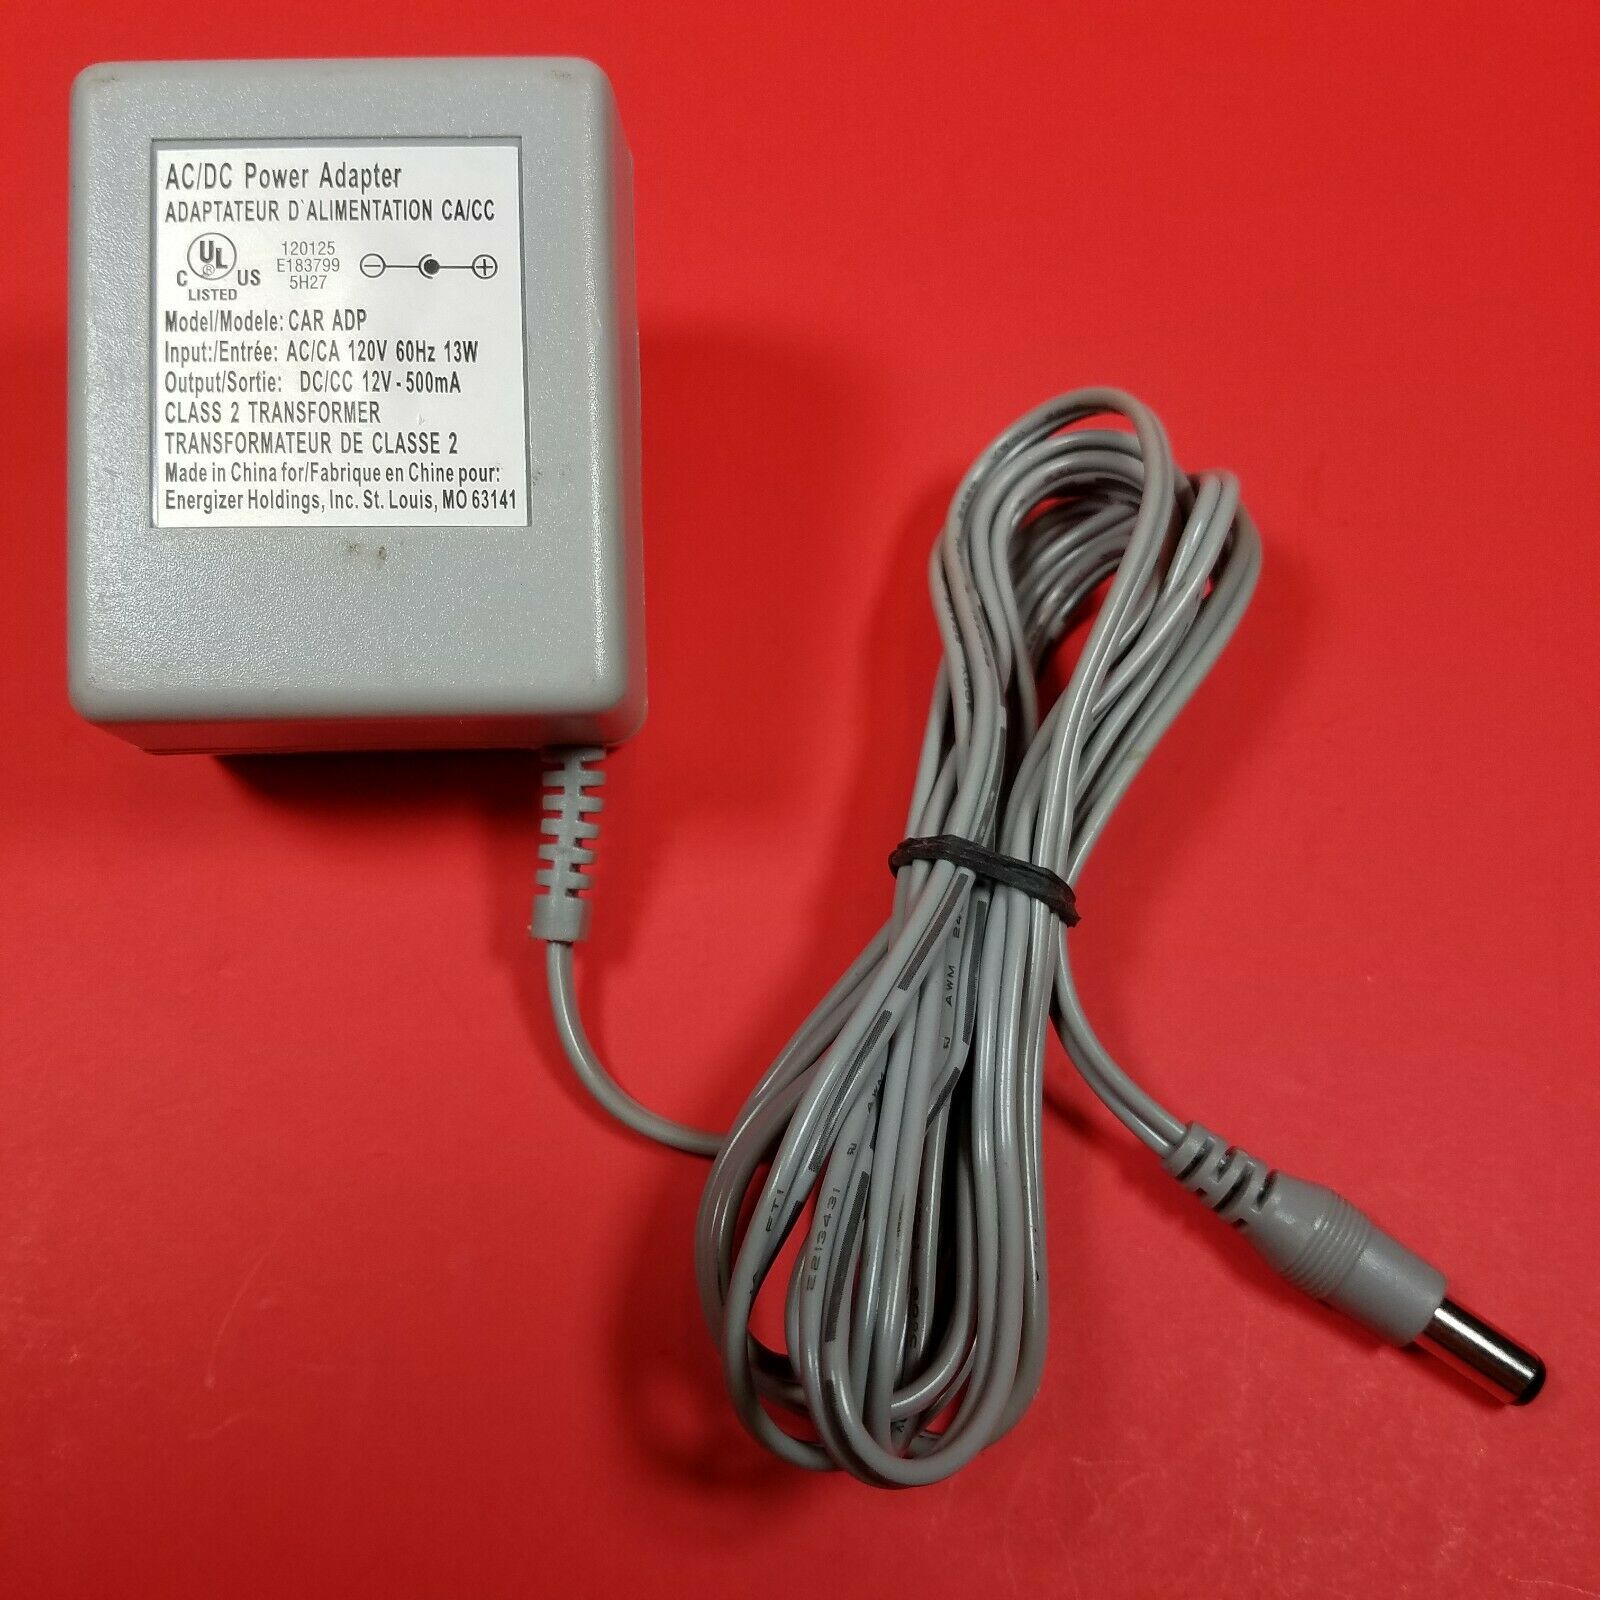 Genuine ENERGIZER CAR ADP Power Supply Adaptor 12V - 500mA OEM AC/DC Adapter Type: AC/DC Power Adapter Features: Po